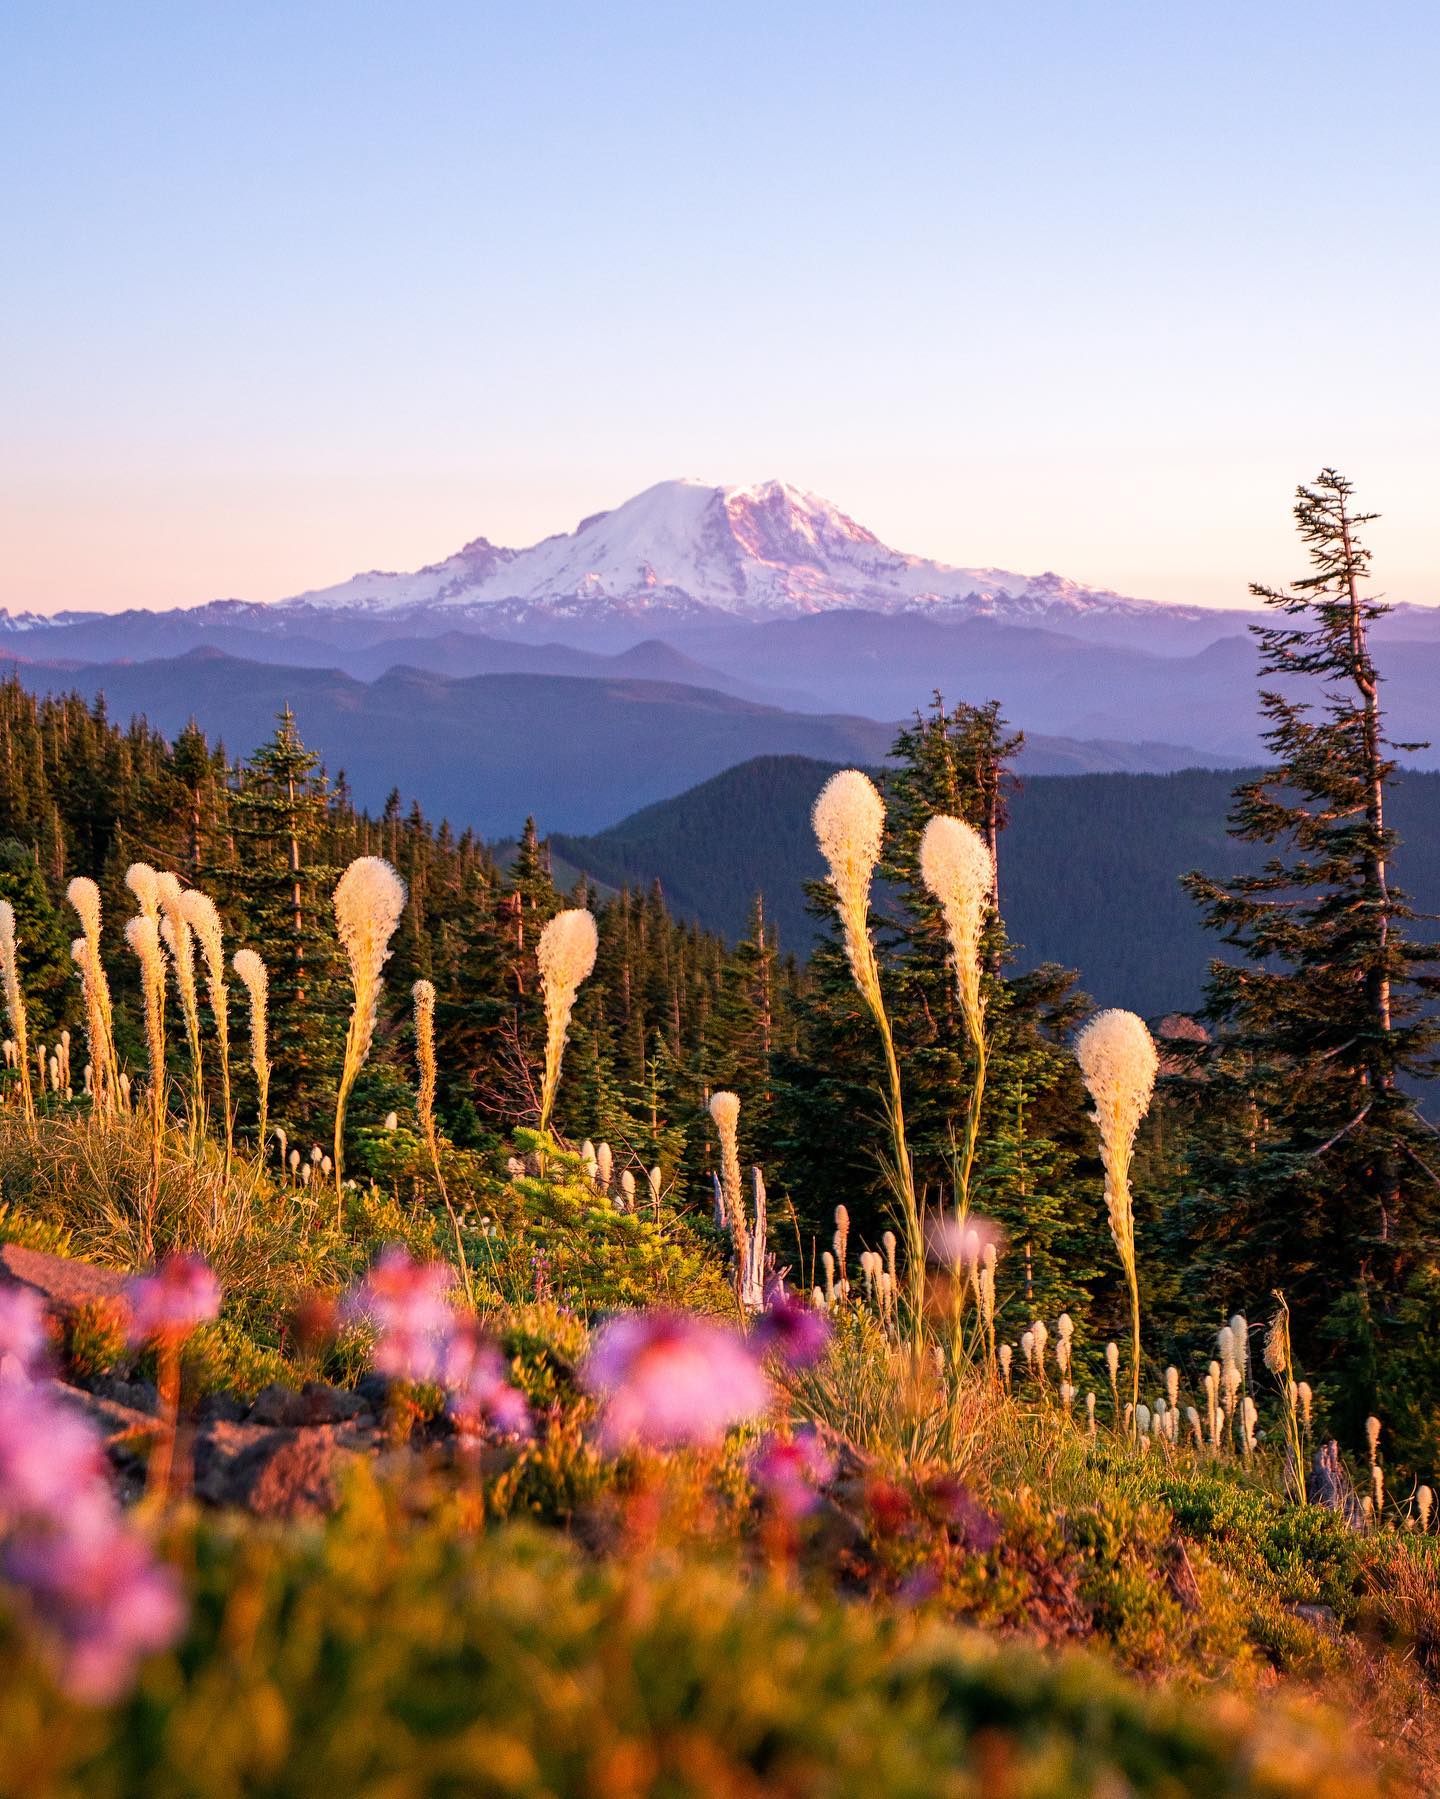 Nothing beats summer in the PNW🌸 

The past week I have been back home in Washington visiting family. Over the weekend, we managed to squeeze in a small sunset hike just outside of Mt Rainier National Park. 

I wasn’t expecting to see many wildflowers with the high snow levels that the Northwest got over the winter, and boy was I wrong. We reached the summit about 20 minutes before sunset and was greeted by Rainier, and the most beautiful wildflower fields I’ve ever seen. What a place. ✨

.
.
.
.
.
#pnwlife #mtrainiernationalpark #mtrainier #mtrainierwatch #pnwadventures #hikingbangers #washingtontrails #sonyusa #pnwhiking #hikingwashington #visitwashington #optoutdoors #hikepnw #hikewashington #hikevibes #sunsethike #suitcasetravels #outsidemagazine #trailaddict #adventureseekers #travelstoke #idhikethat #nrthwst #pnwonderland #explorewashington #nationalparkphotography #trekkingtoes #findyourselfoutside #wildernessculture #outdoorwomen